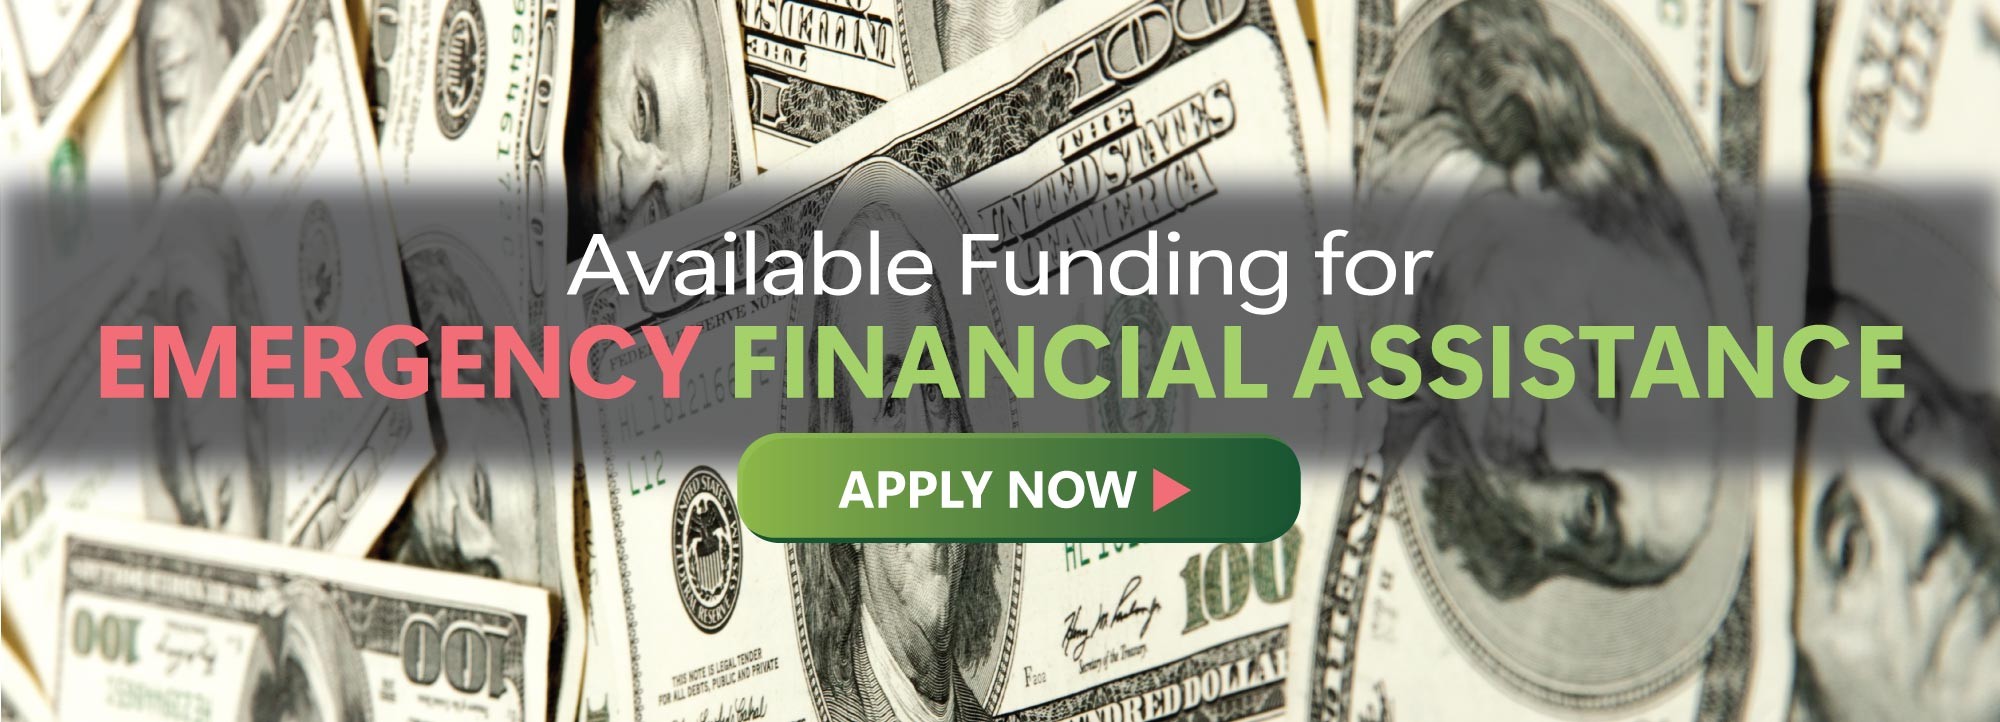 Available Funding for Emergency Financial Assistance Apply Now